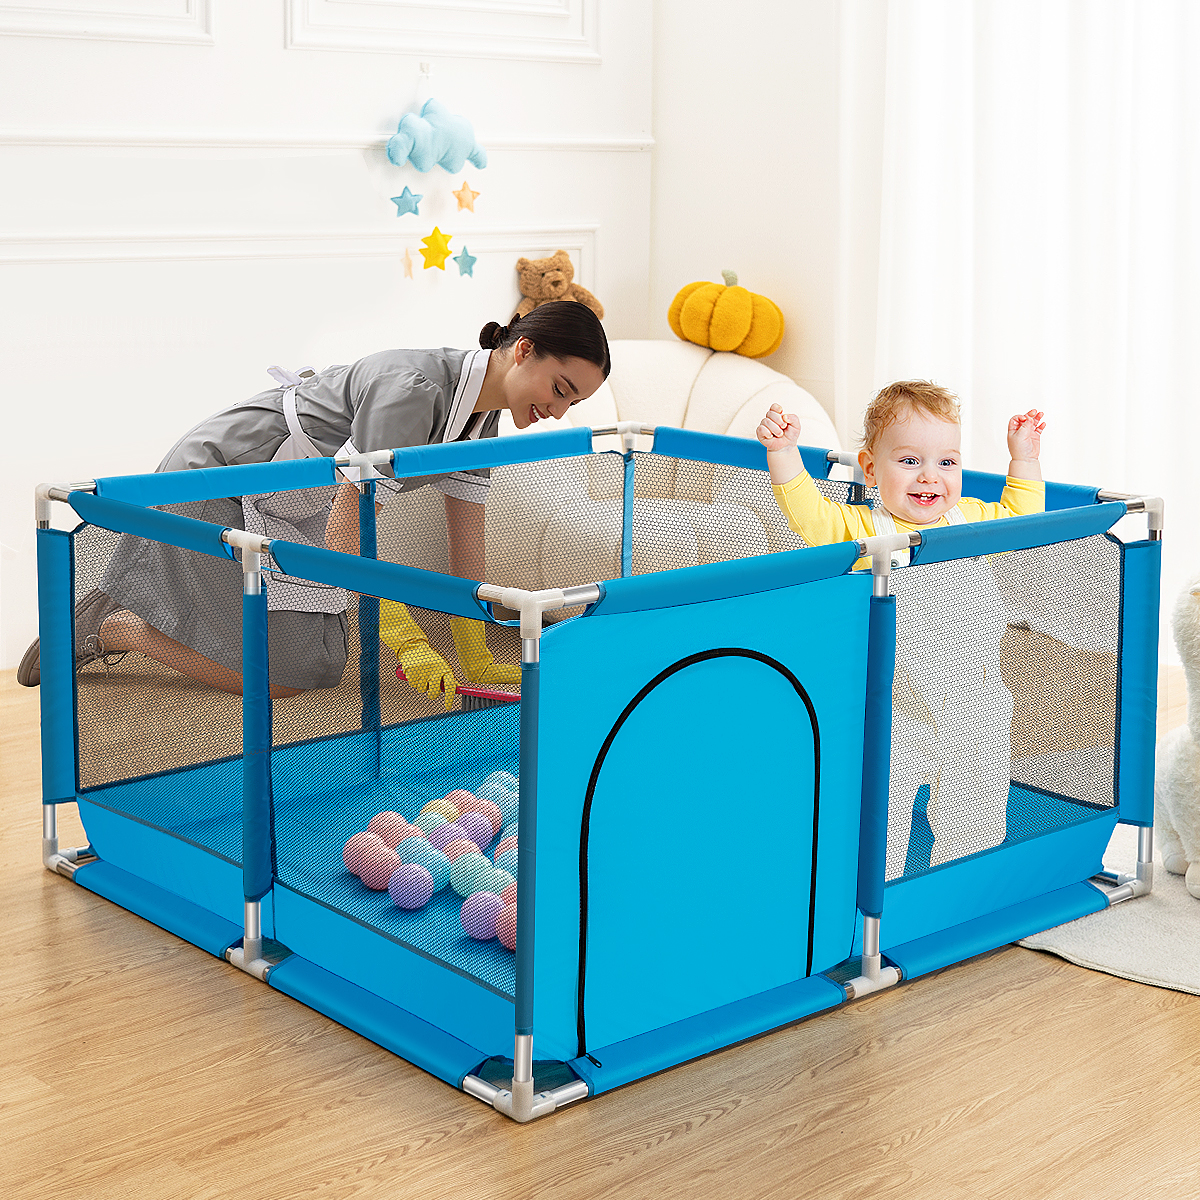 Baby Playpen,Outdoor Play Yard,Portable 4-Panel Baby Safety Playpen for Infant Toddler,Blue - image 2 of 5